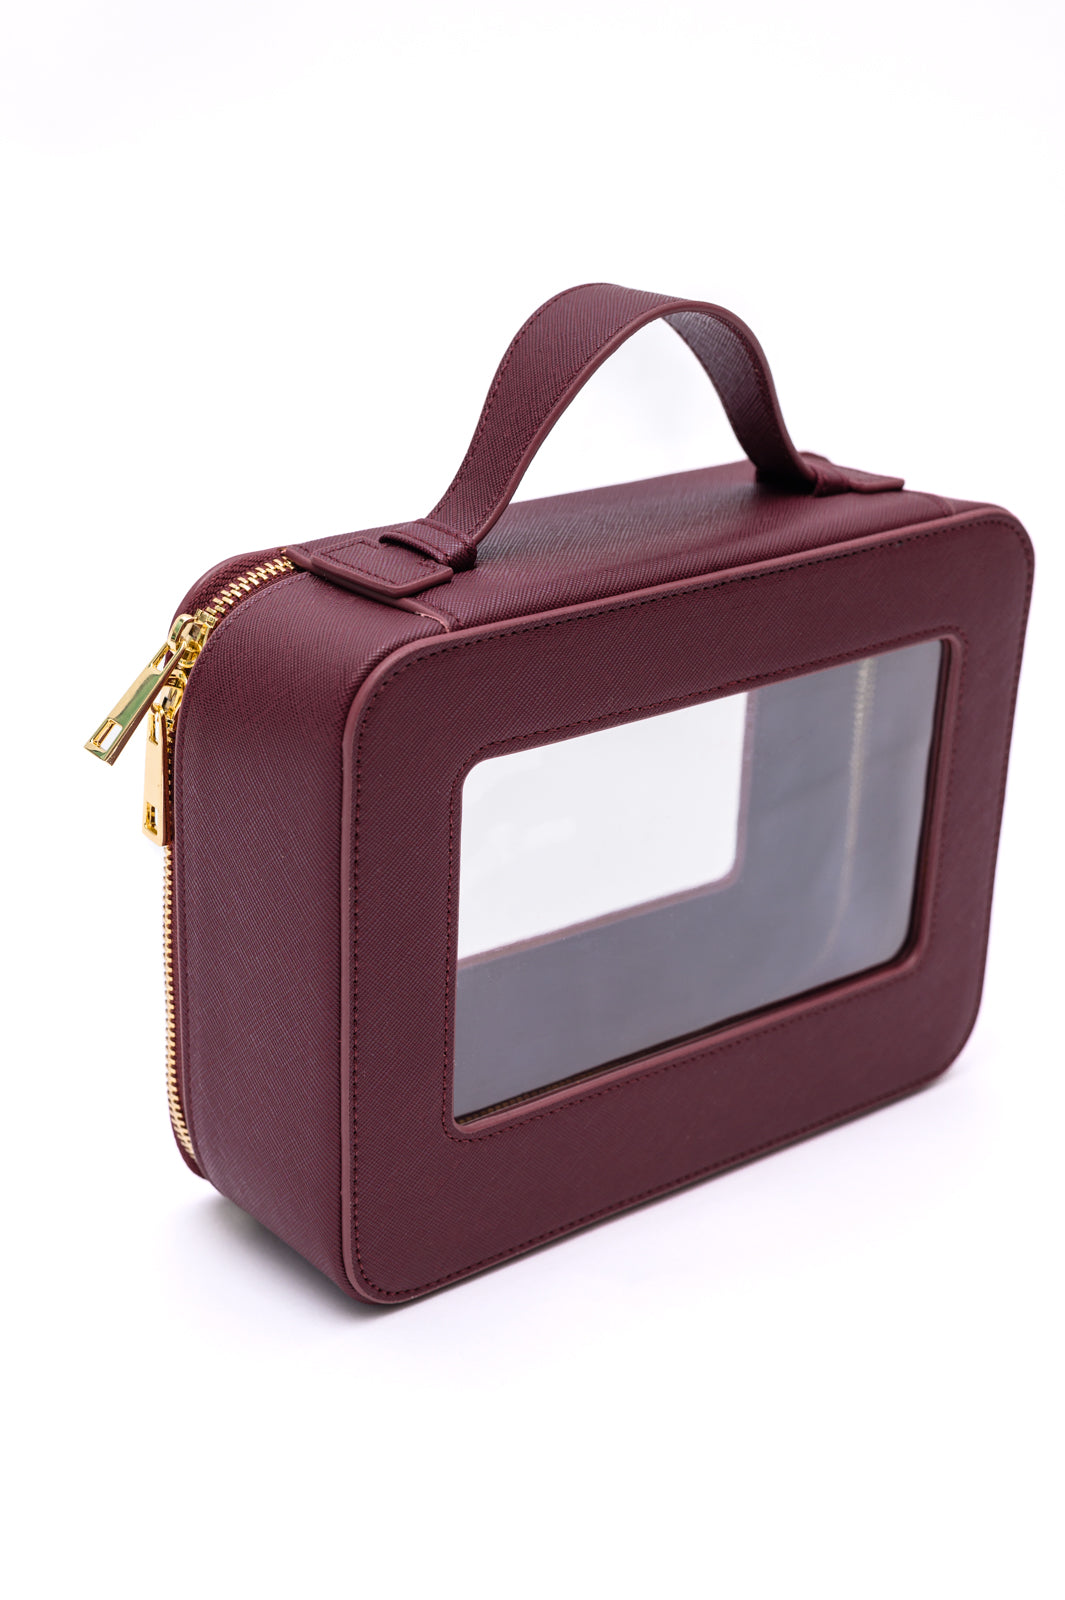 PU Leather Travel Cosmetic Case in Wine - 2/23